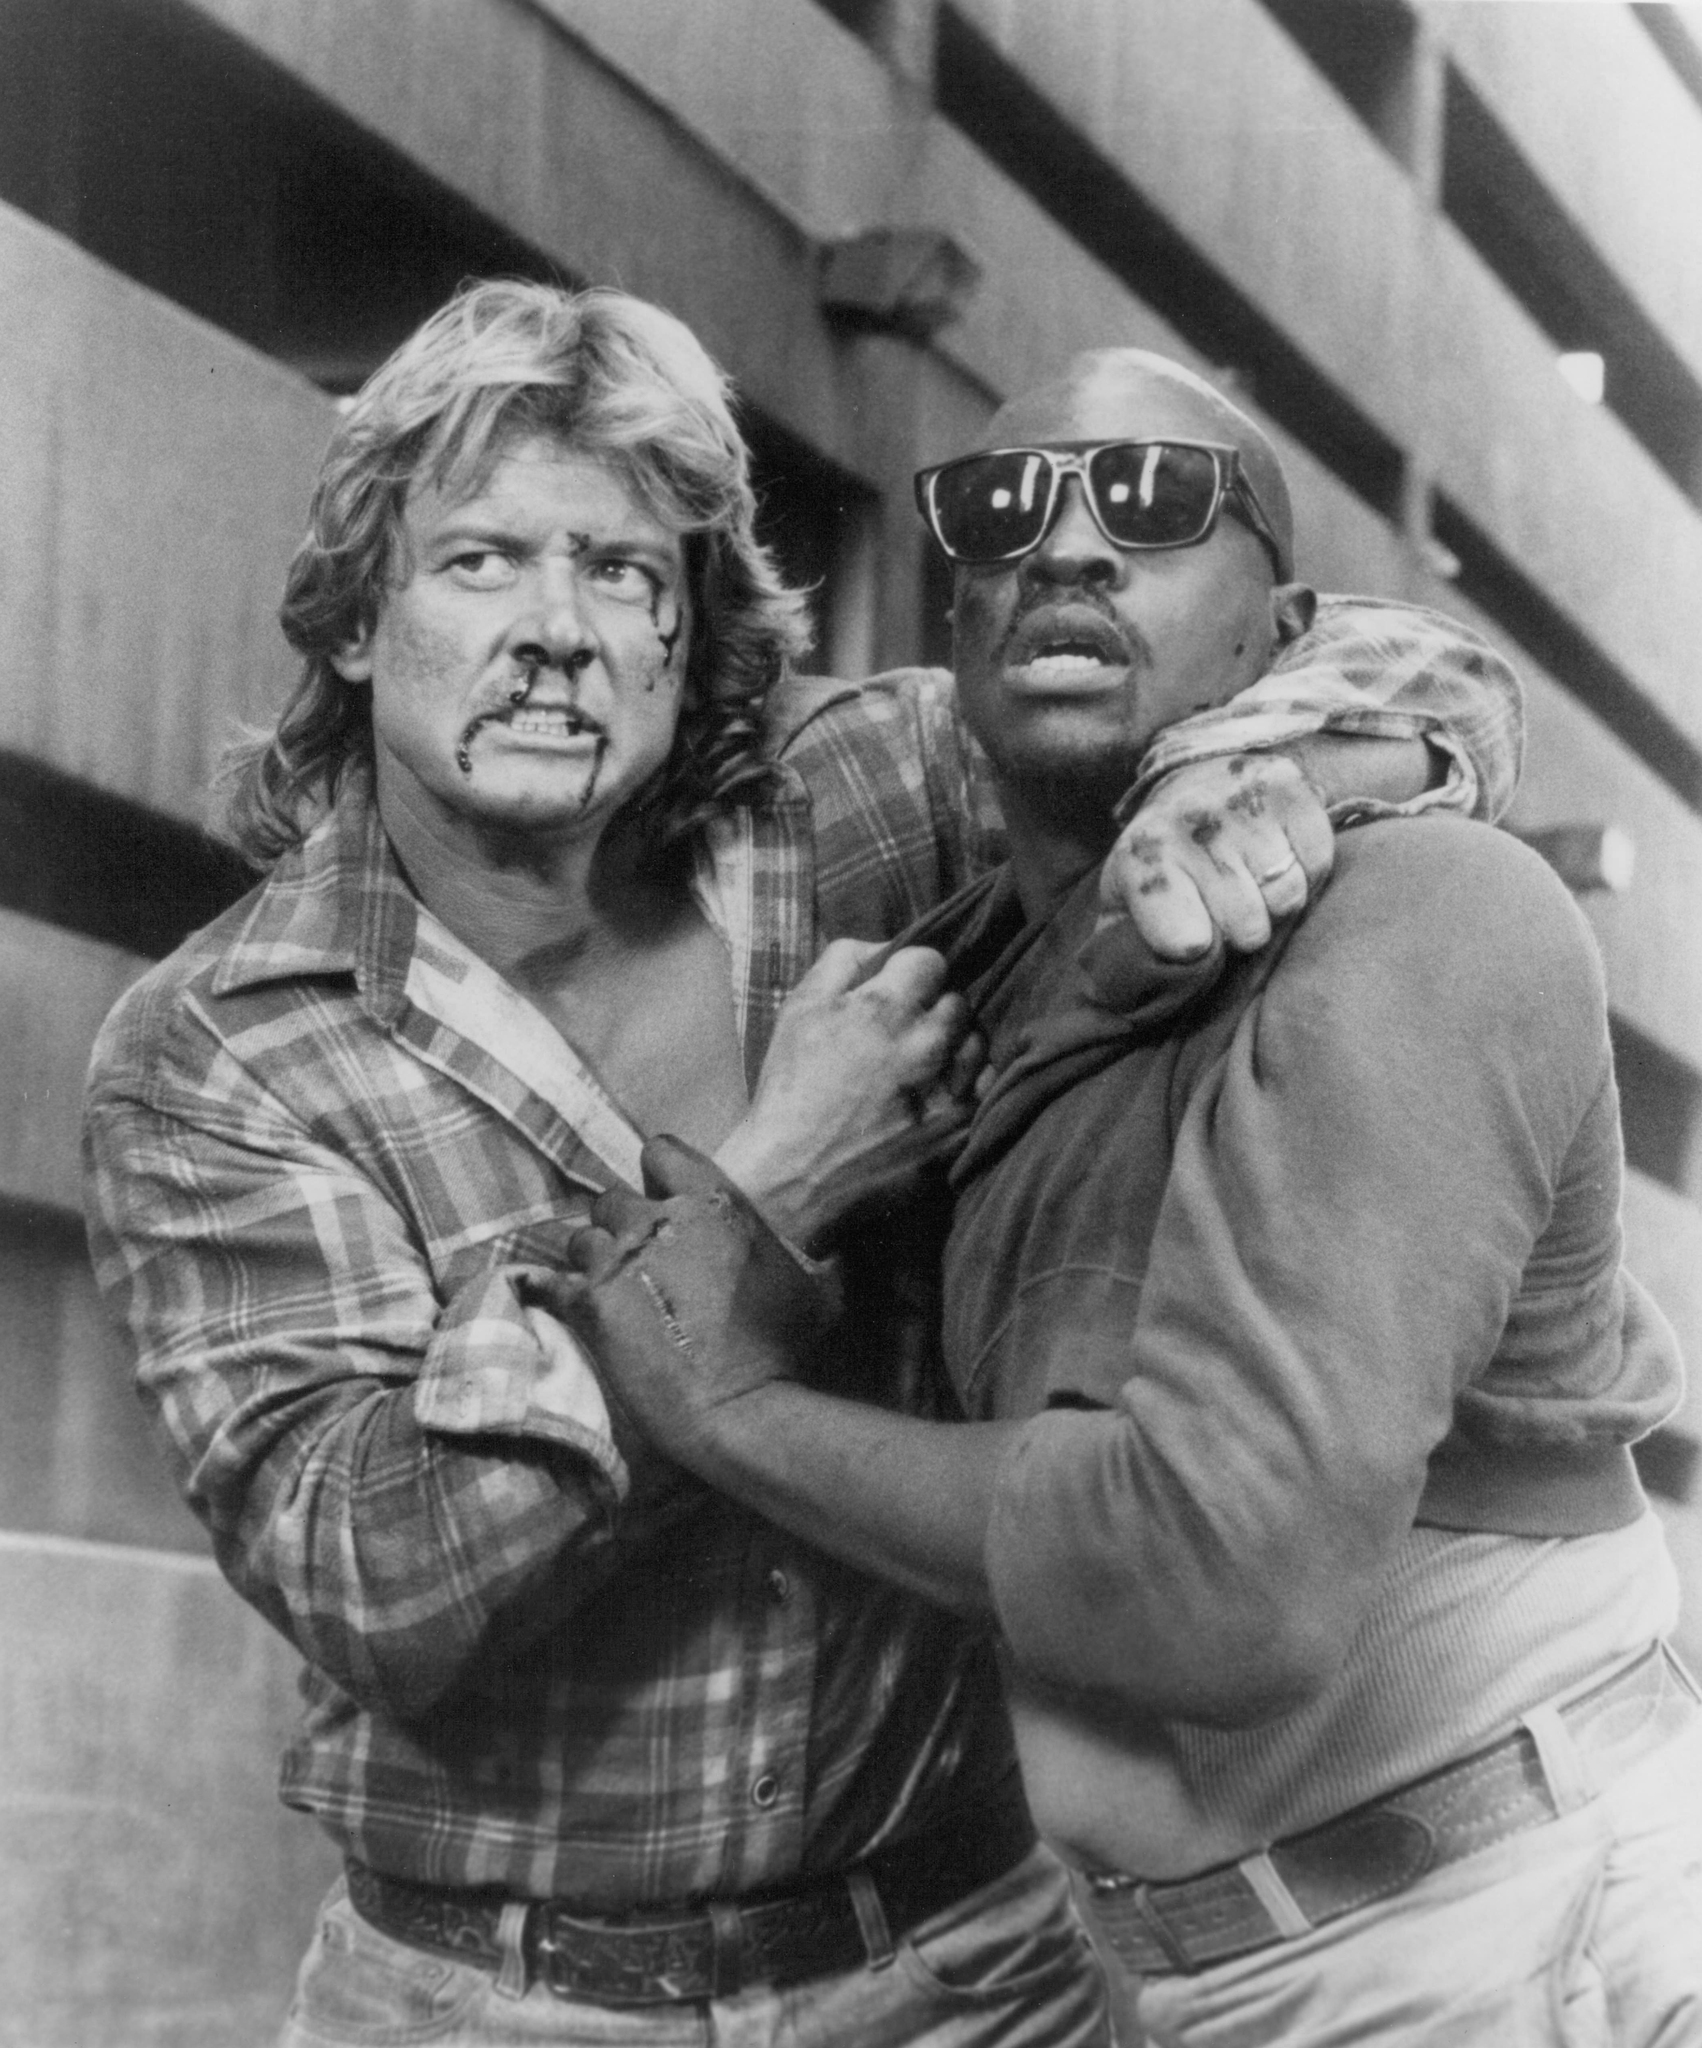 Still of Keith David and Roddy Piper in They Live (1988)